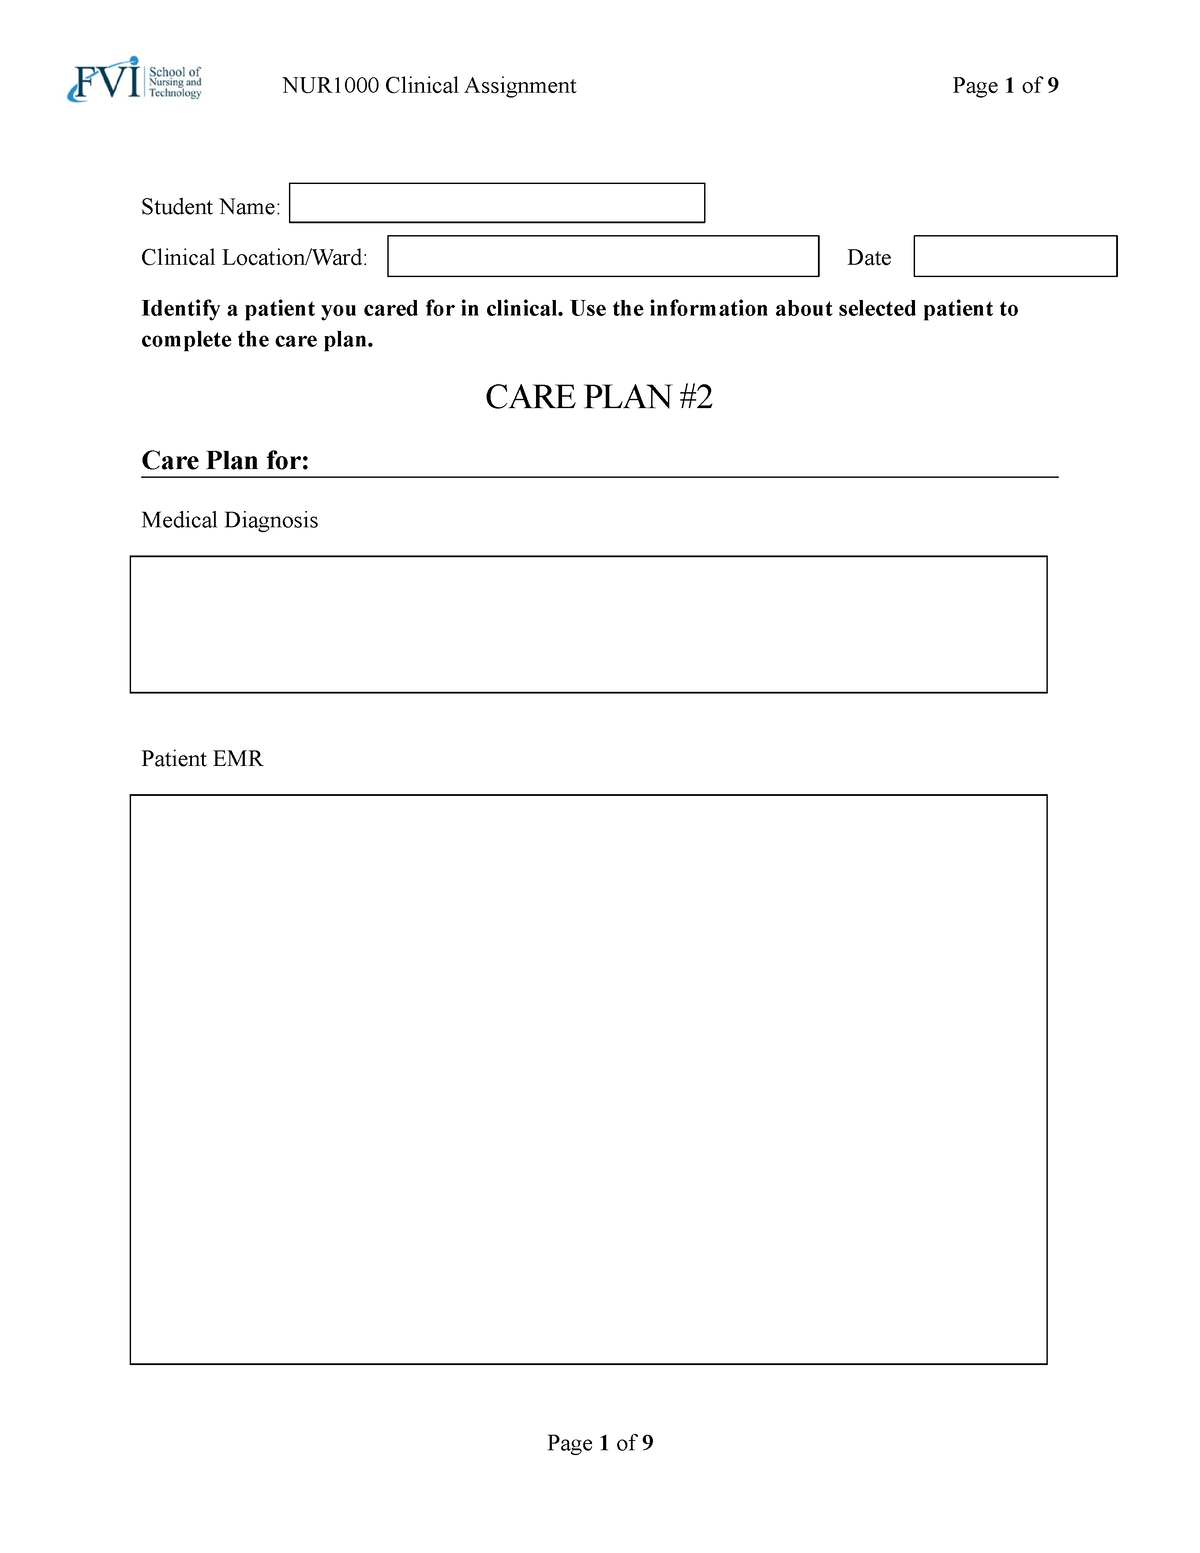 Care Plan #2 new form - notes - Student Name: Clinical Location/Ward ...